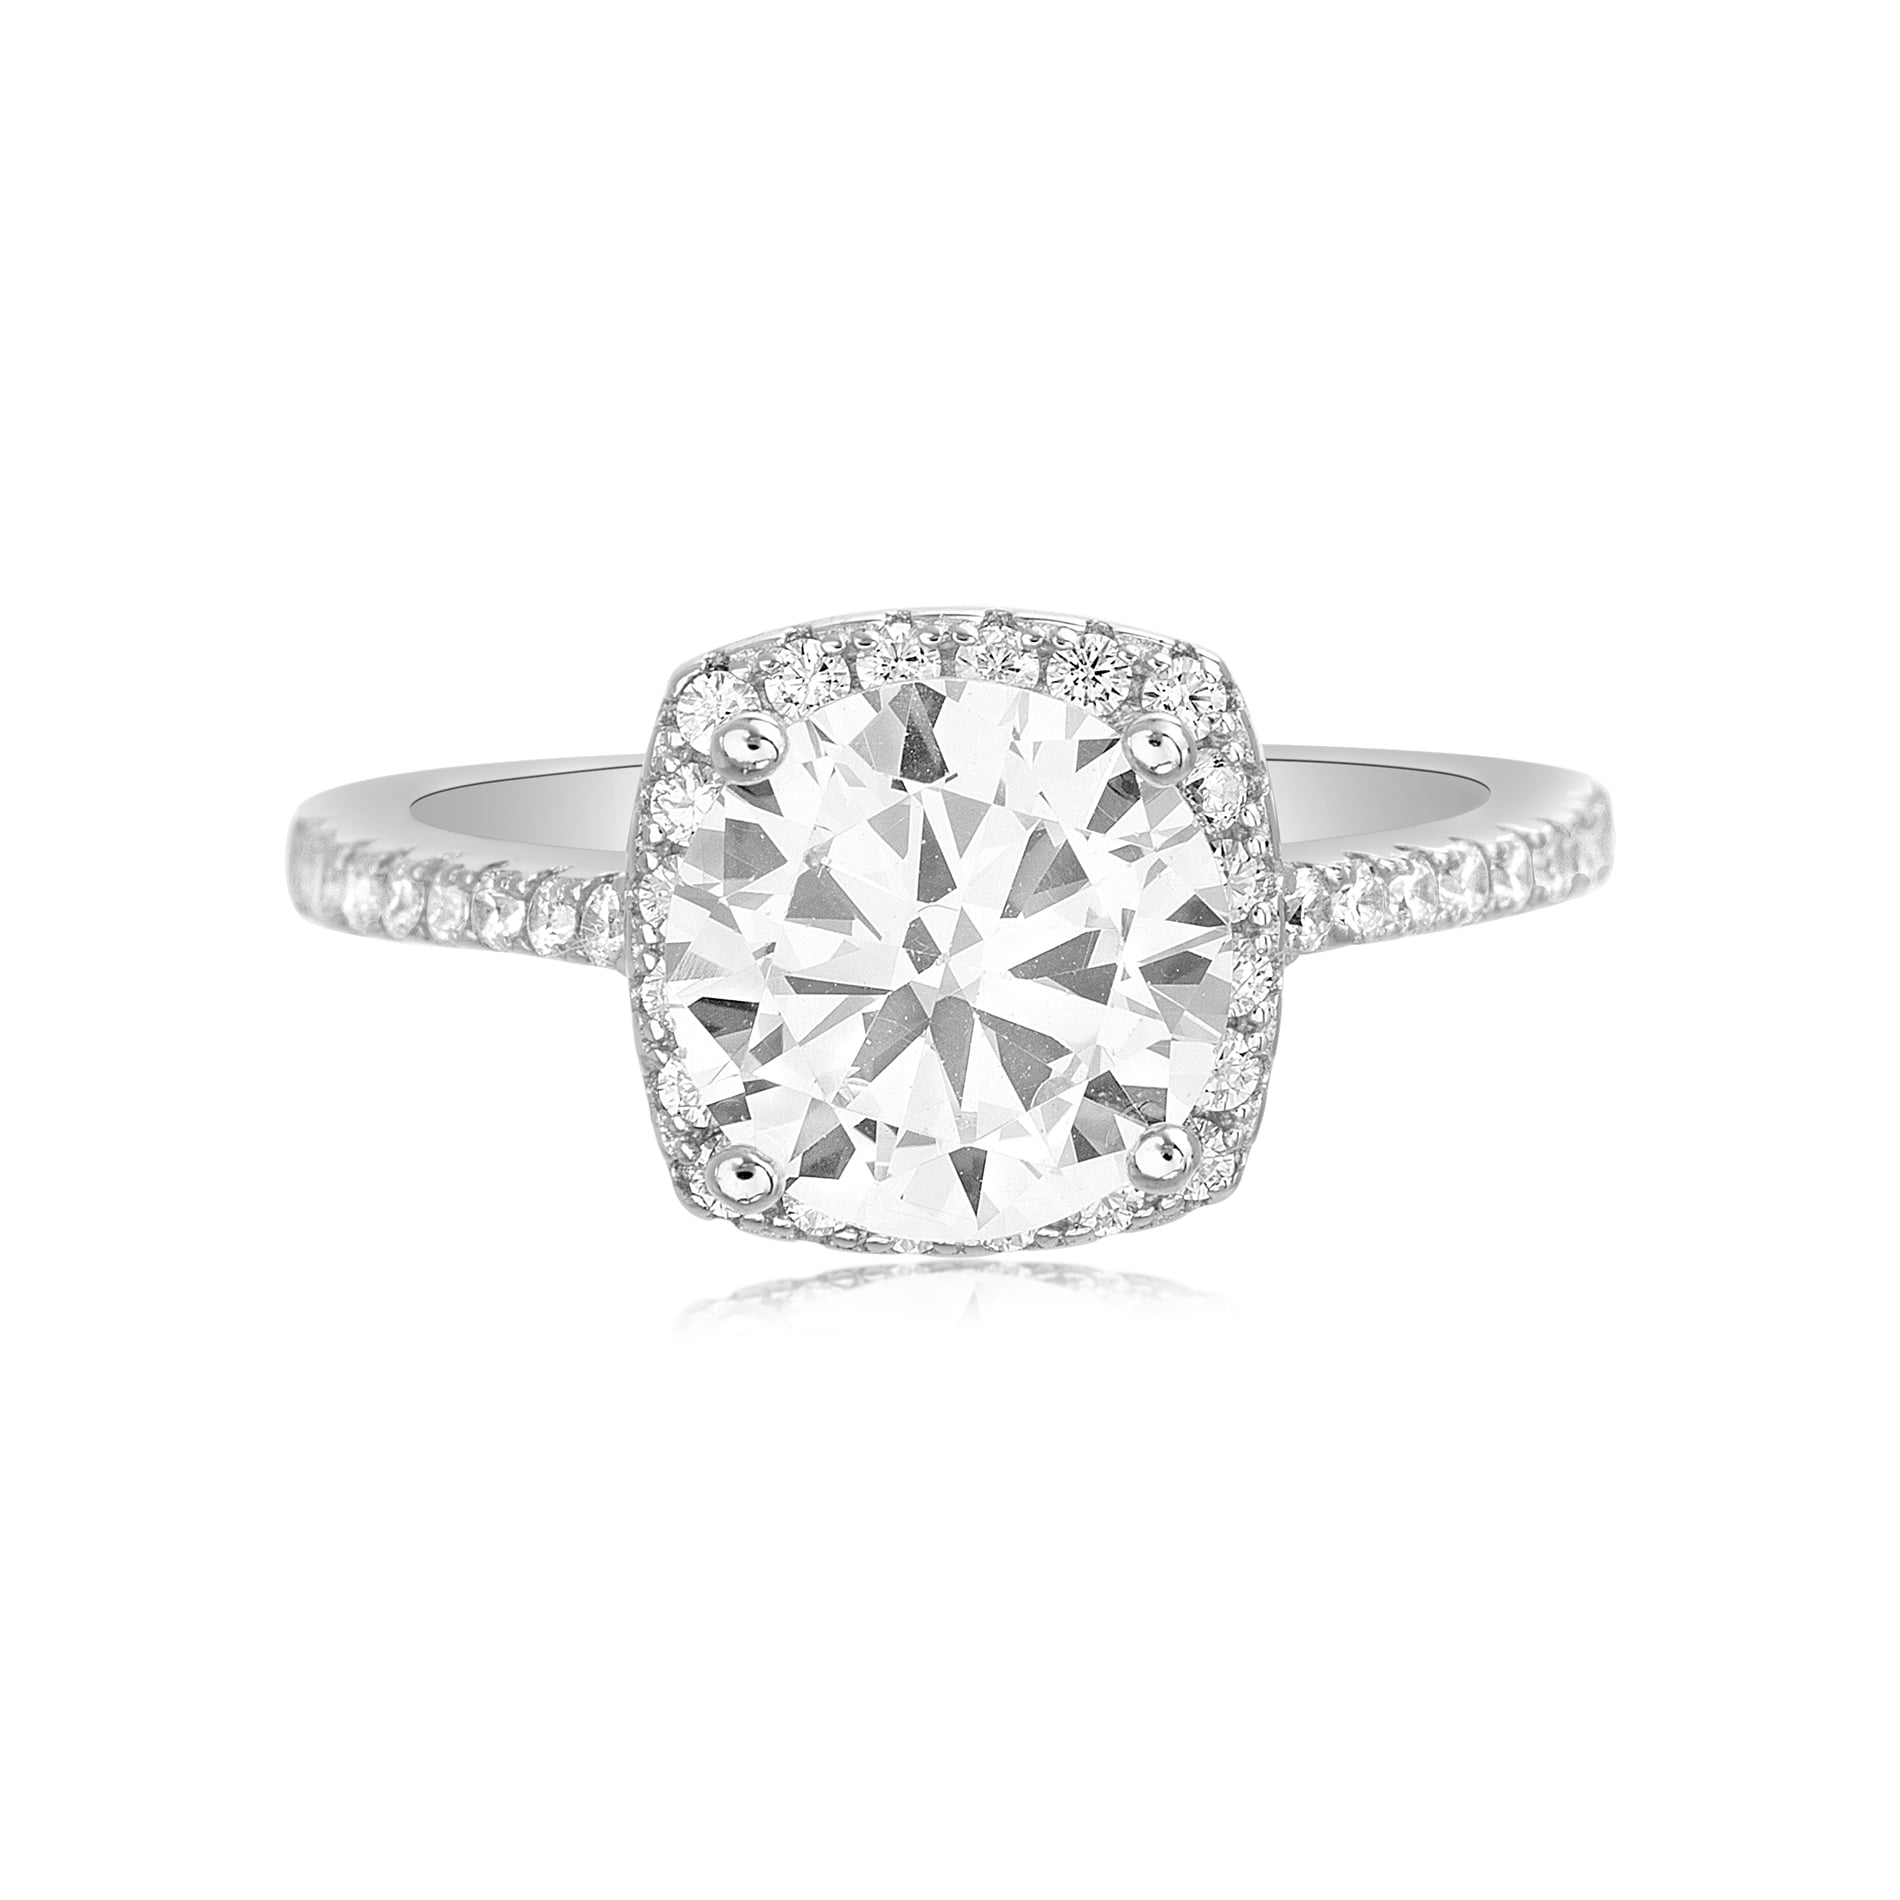 Concept Jewelry 2Ct Round Cut Cubic Zirconia Halo Solitaire Engagement Ring in 925 Sterling Silver with 14k White Gold Finish